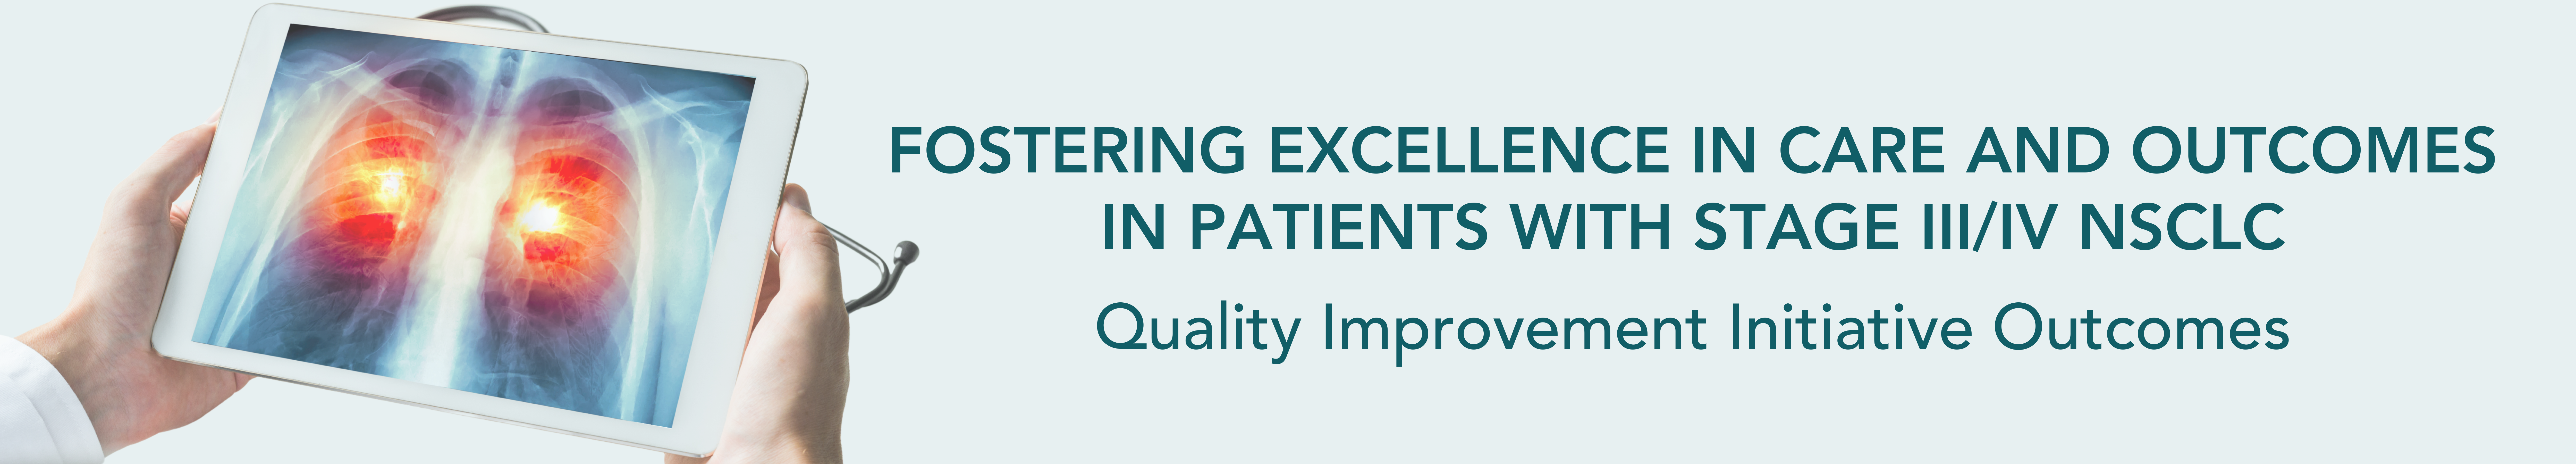 Fostering Excellence in Care and Outcomes in Patients with Stage III/IV NSCLC: Quality Improvement Initiative Outcomes